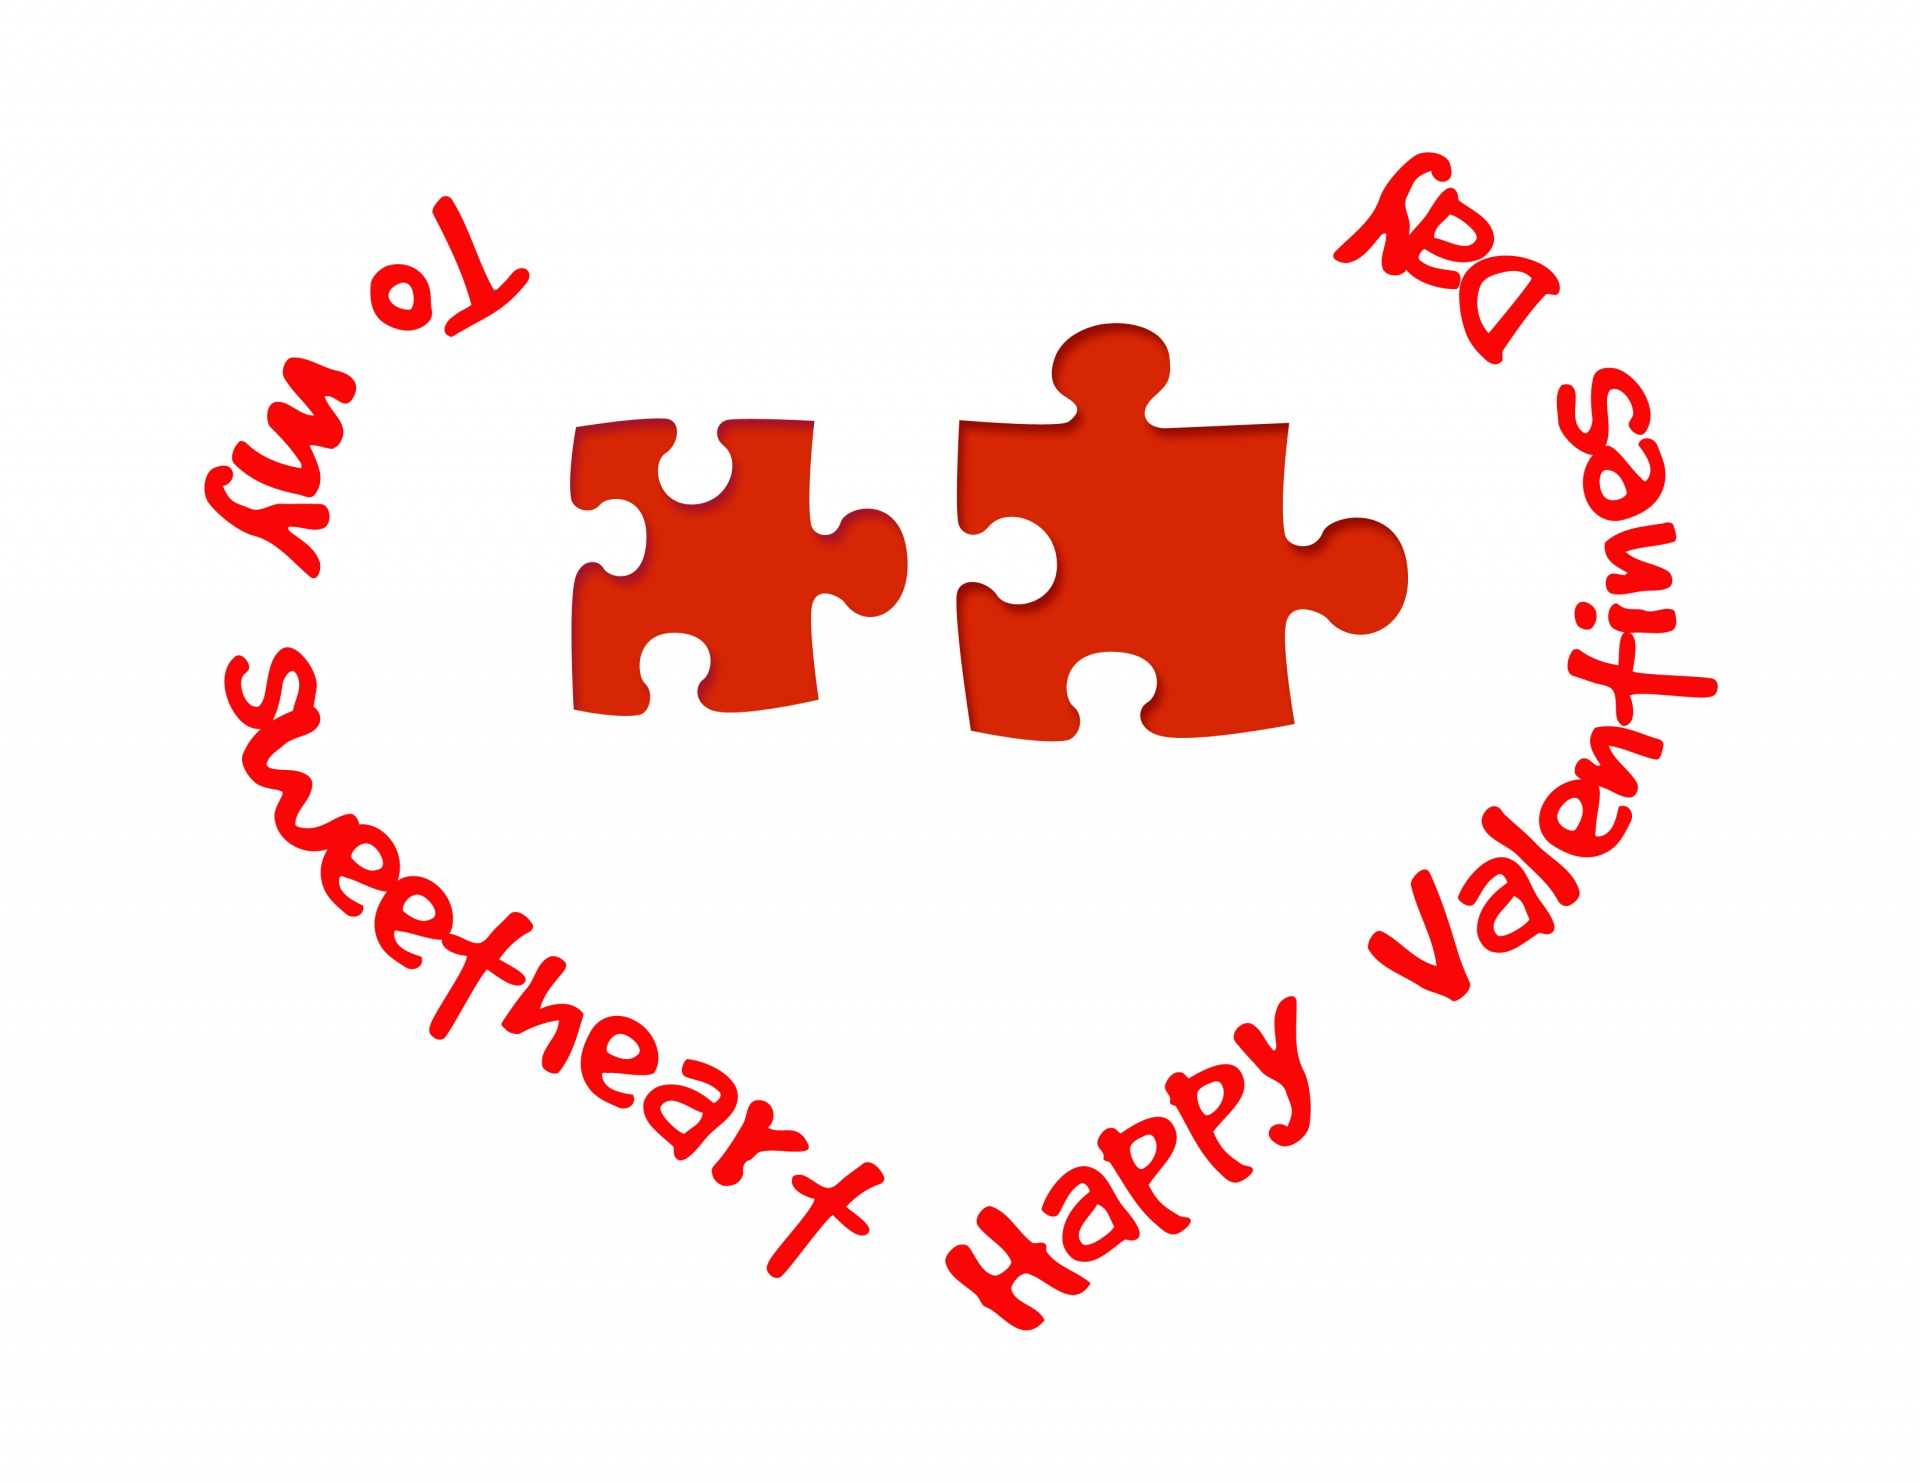 perfect fit valentines day card puzzle pieces free photo